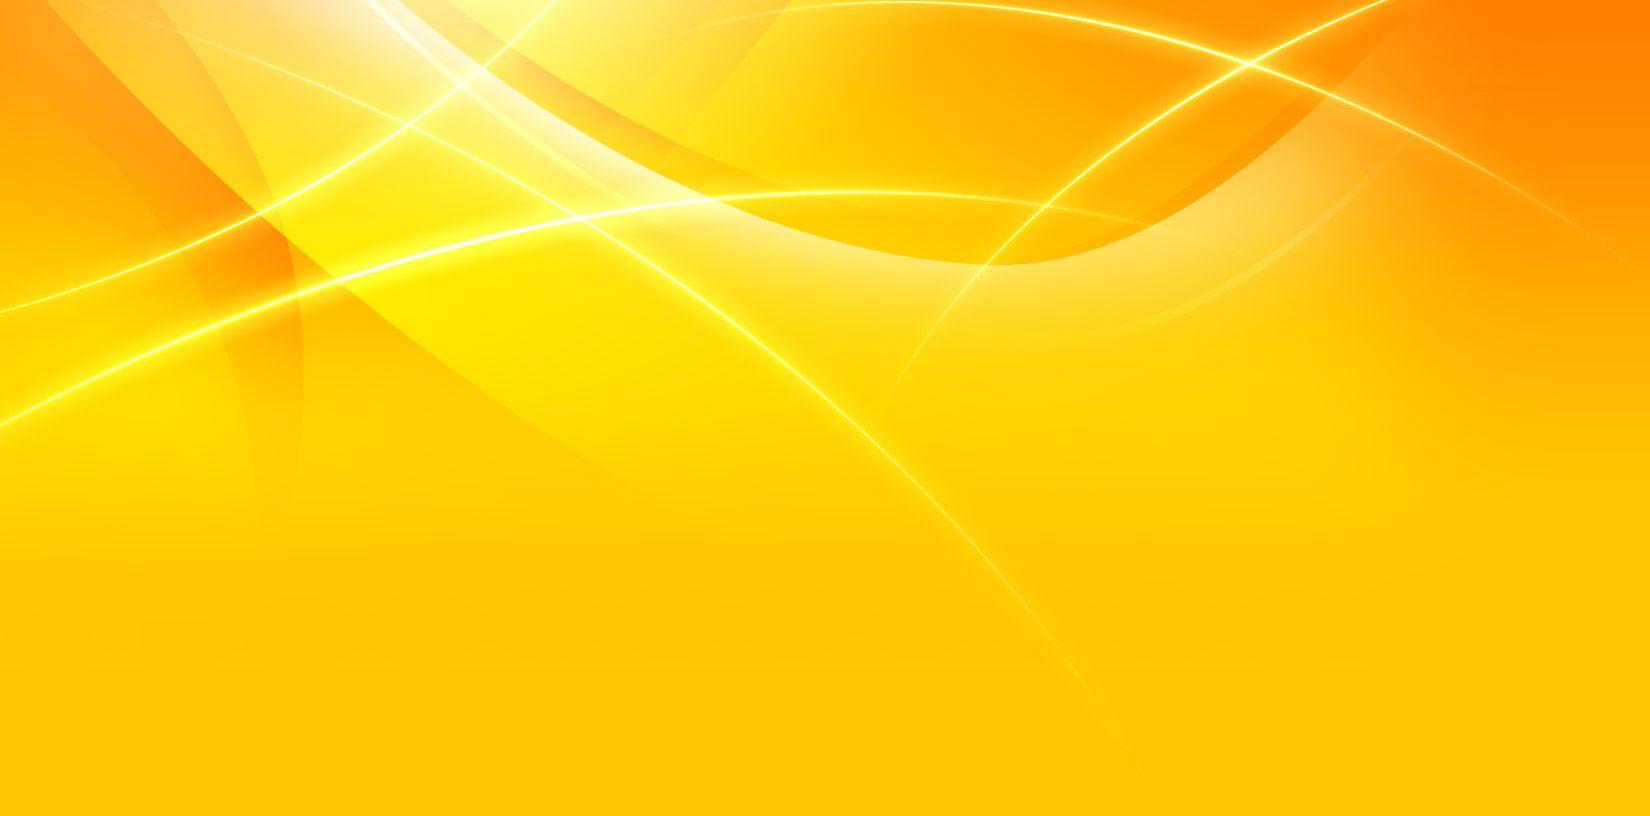 Awesome HDQ Live Orange Background Collection BsnSCB. HD